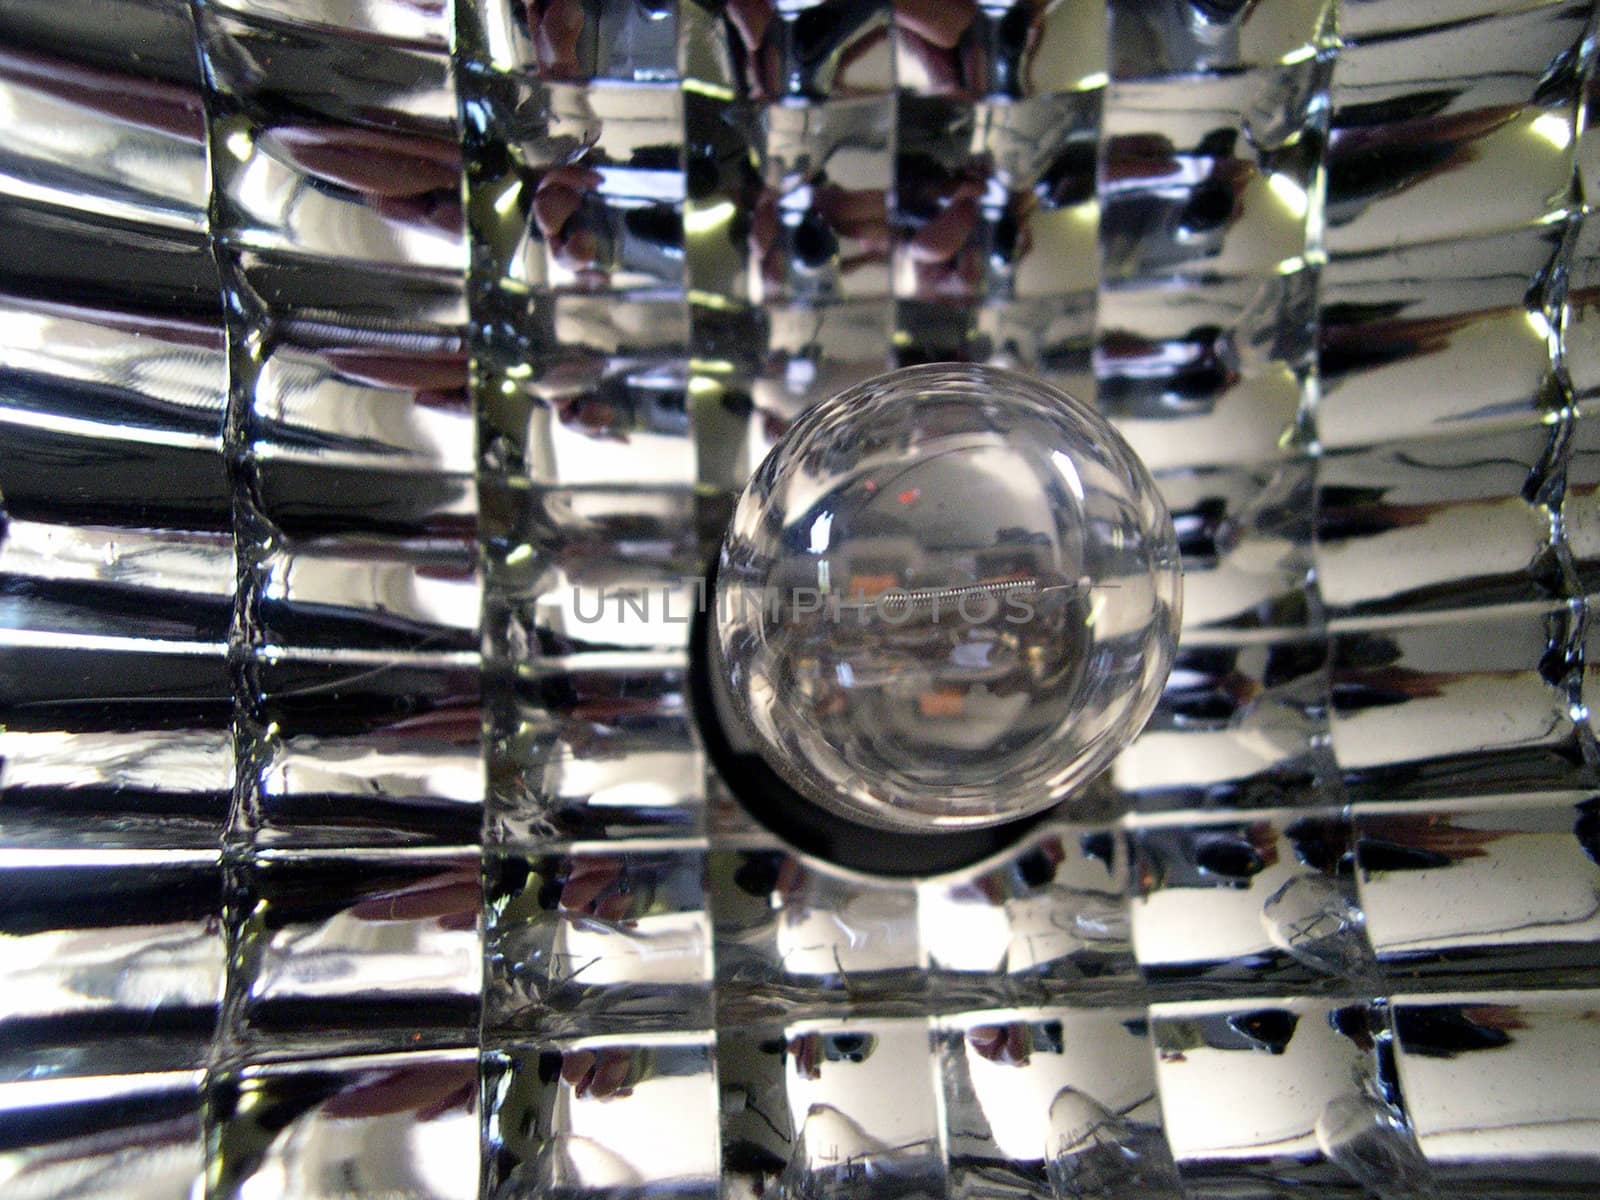 s bulb, mounted in a reflective housing.